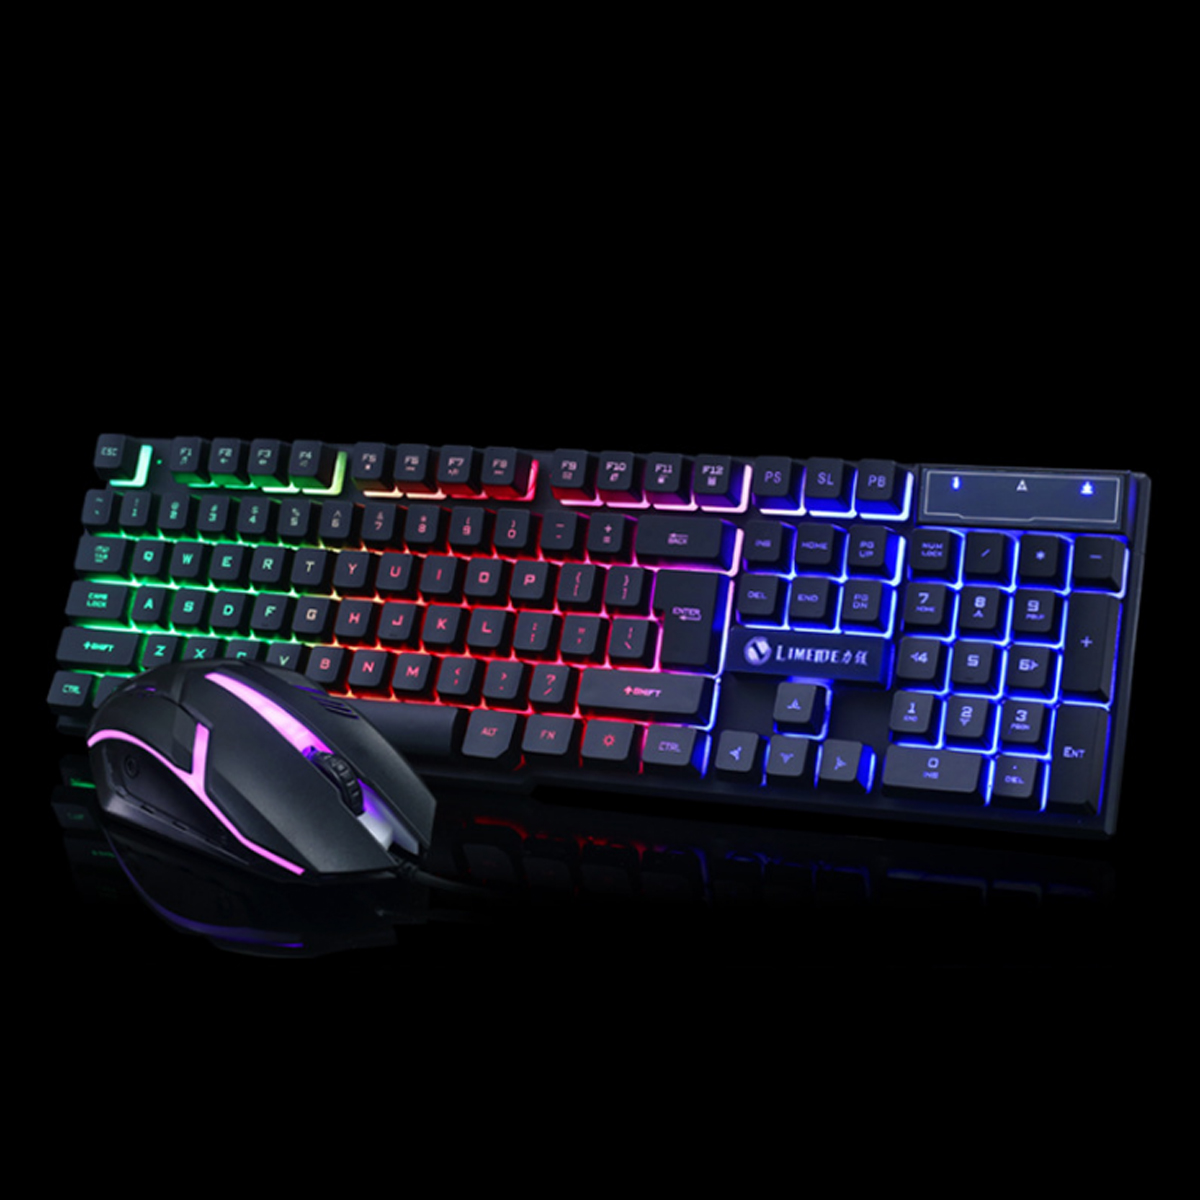 GTX300 104 Keys RGB Backlight Superthin Gaming Keyboard and 2.4GHZ 1200DPI 3 buttons USB Optical Gaming Mouse 2